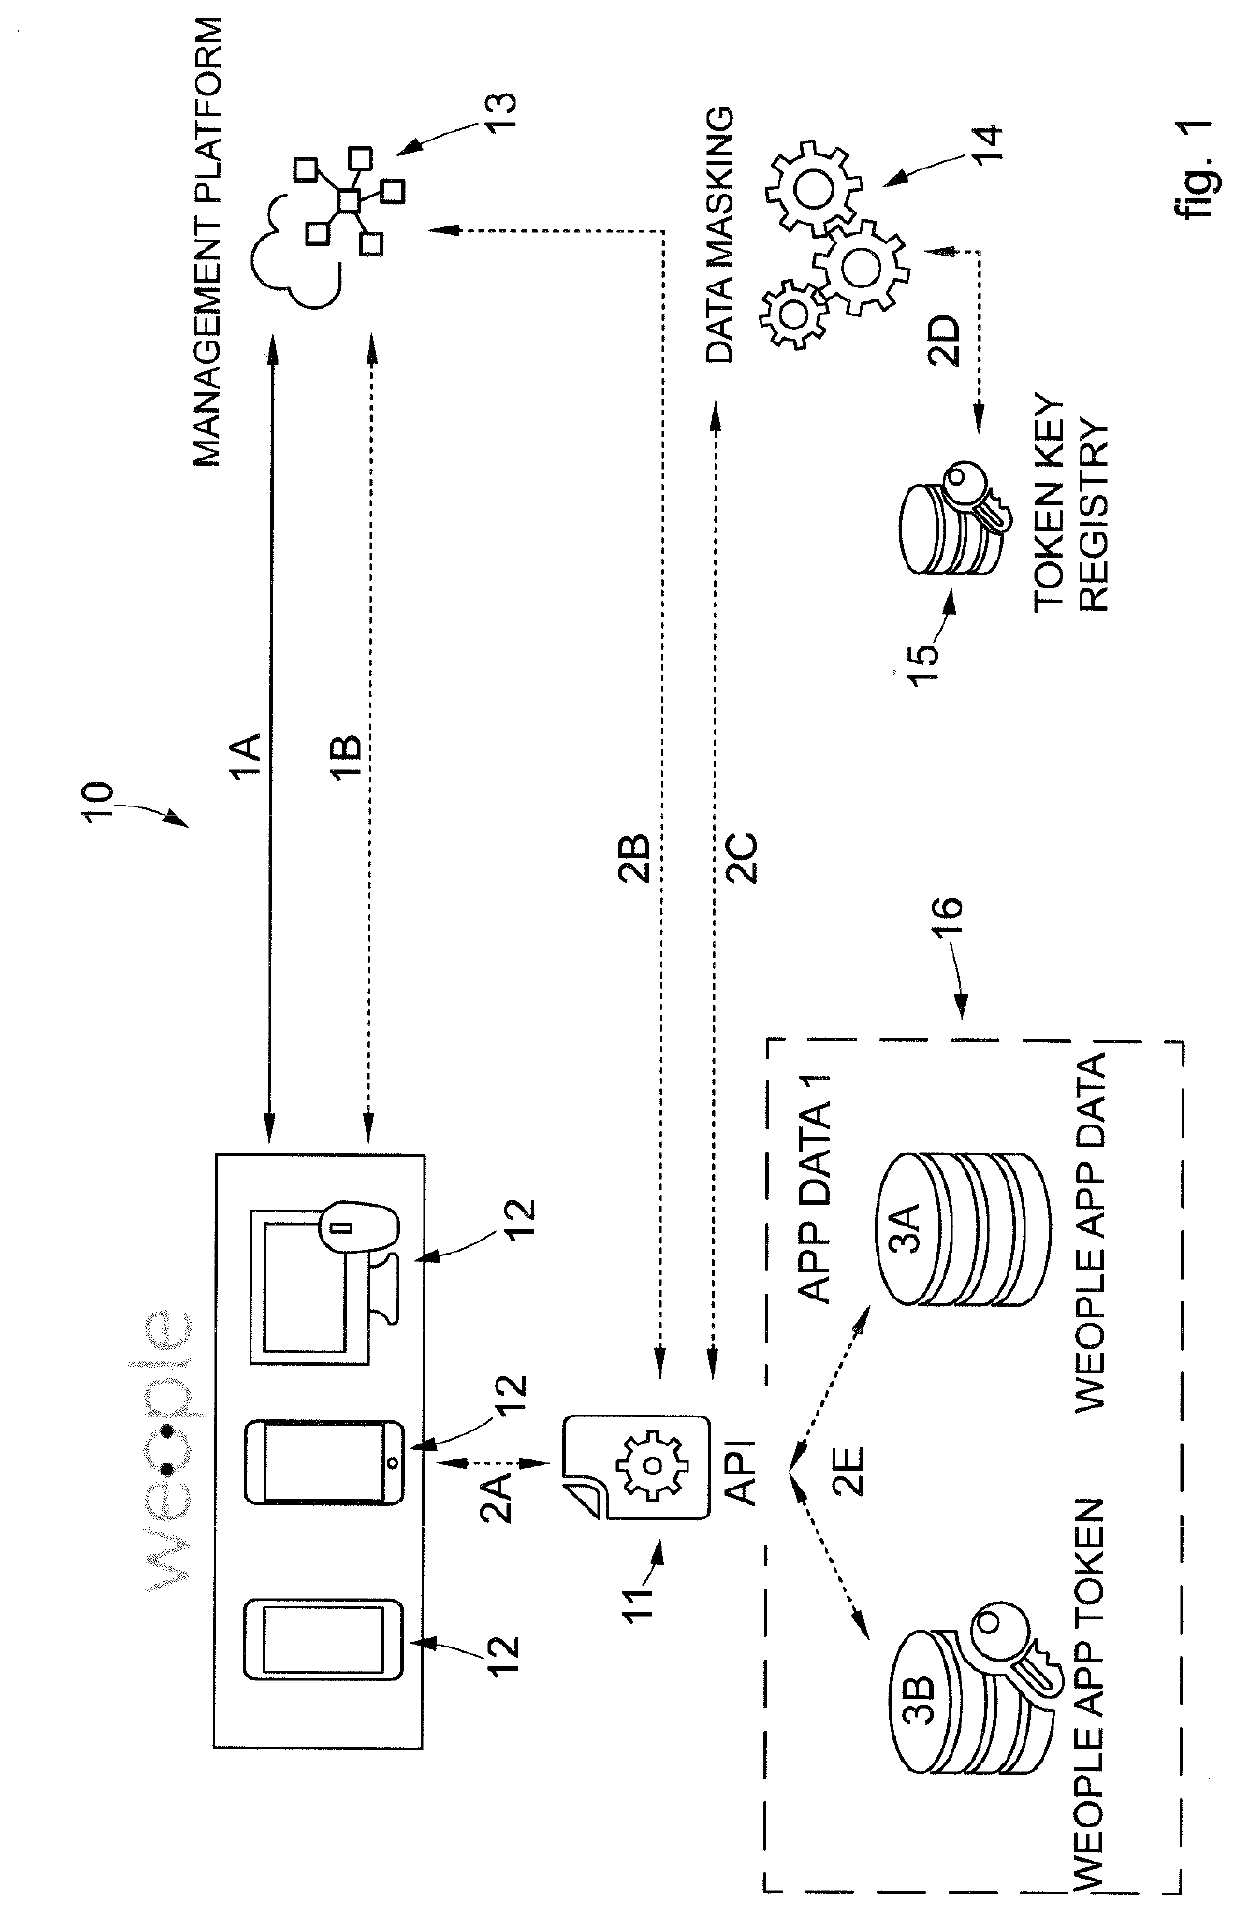 Architecture and method for tracking and managing digital data